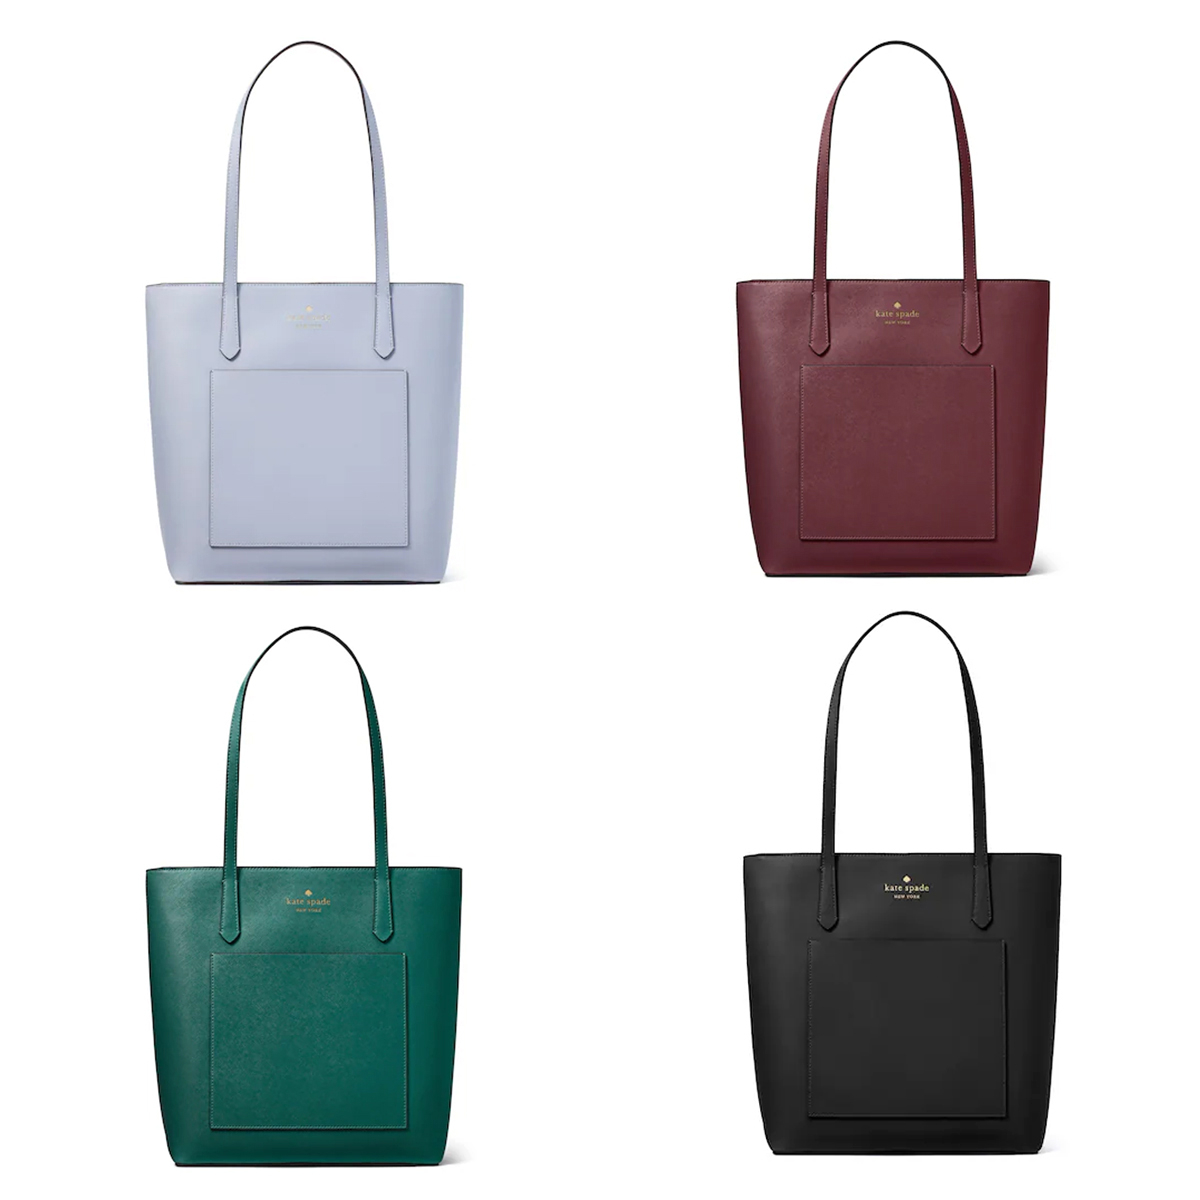 Kate Spade 24-Hour Flash Deal: Get This $460 Tote Bag for Just $109